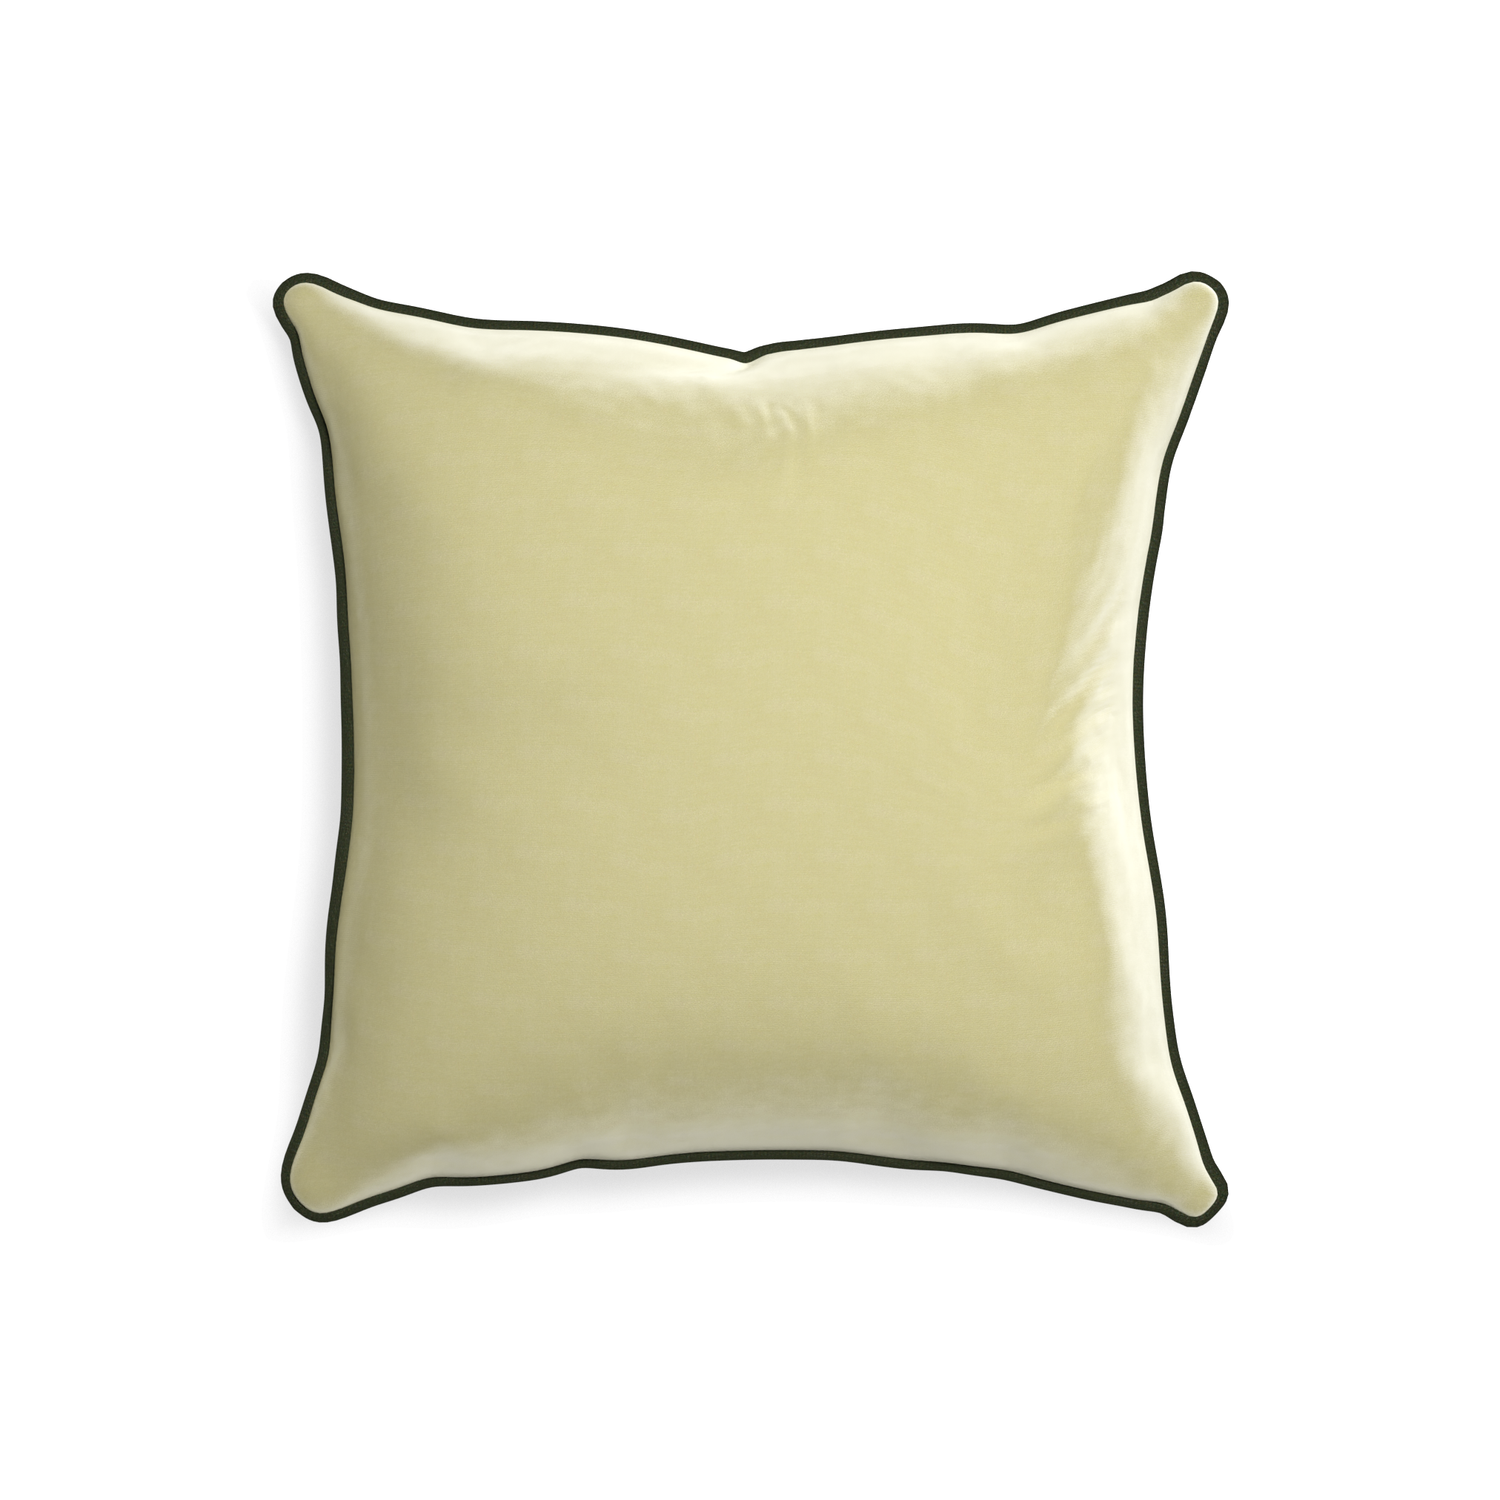 20-square pear velvet custom light greenpillow with f piping on white background